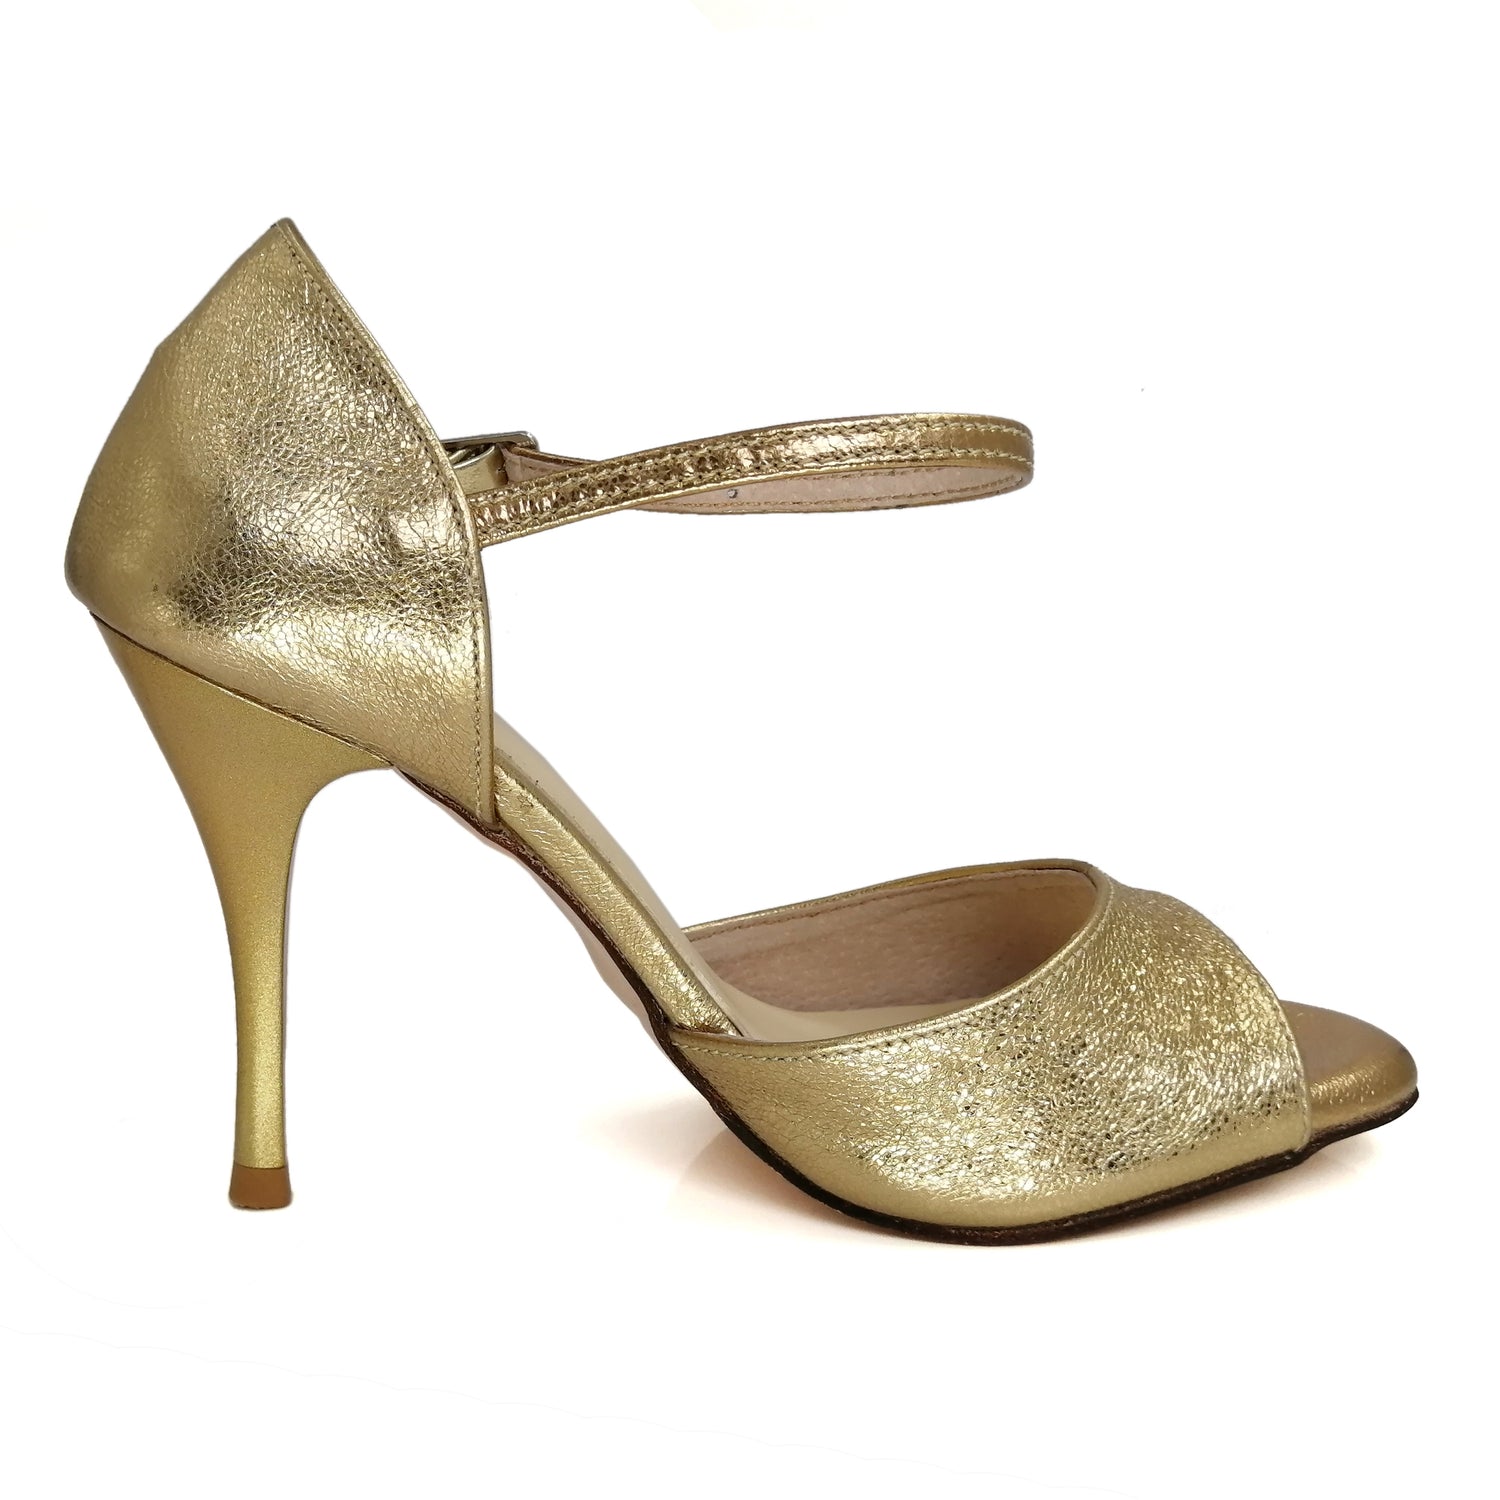 Pro Dancer Women's Gold Tango Shoes with High Heels and Leather Sole for Argentine Tango Dancing (PD9035A)0